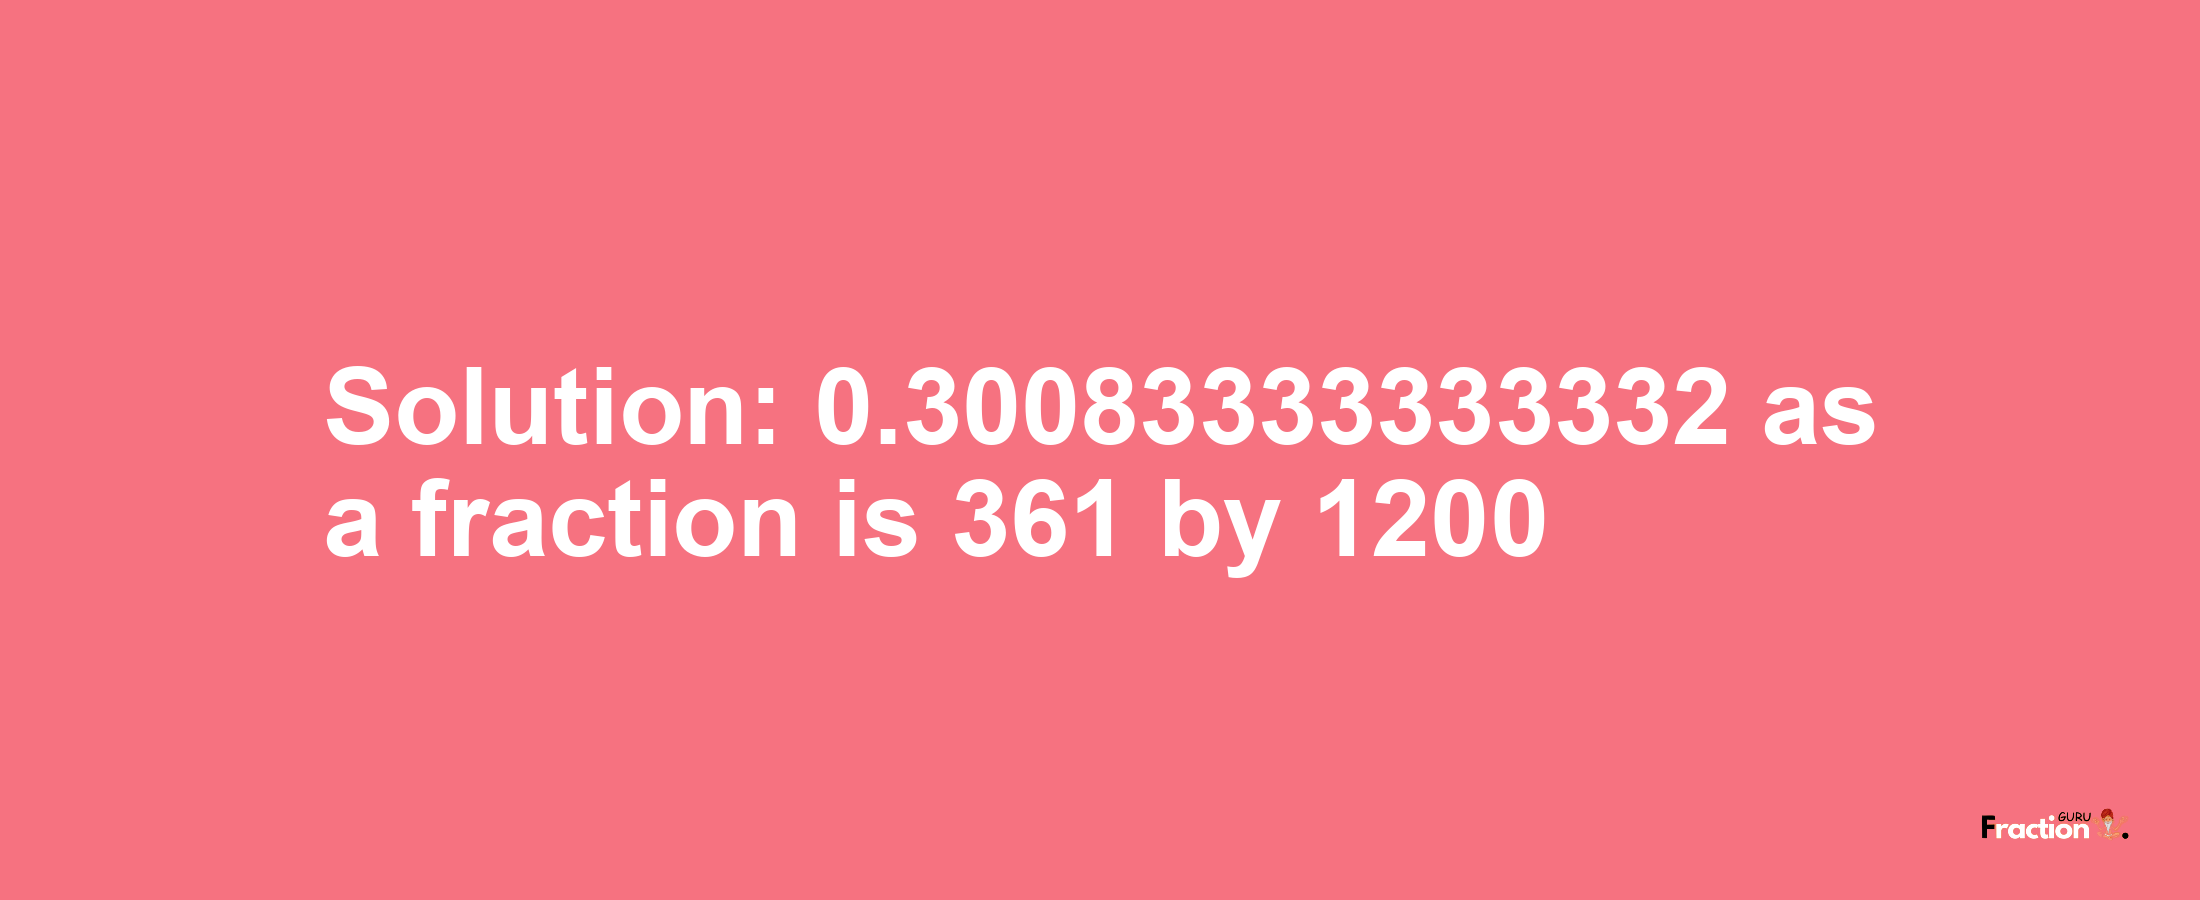 Solution:0.30083333333332 as a fraction is 361/1200